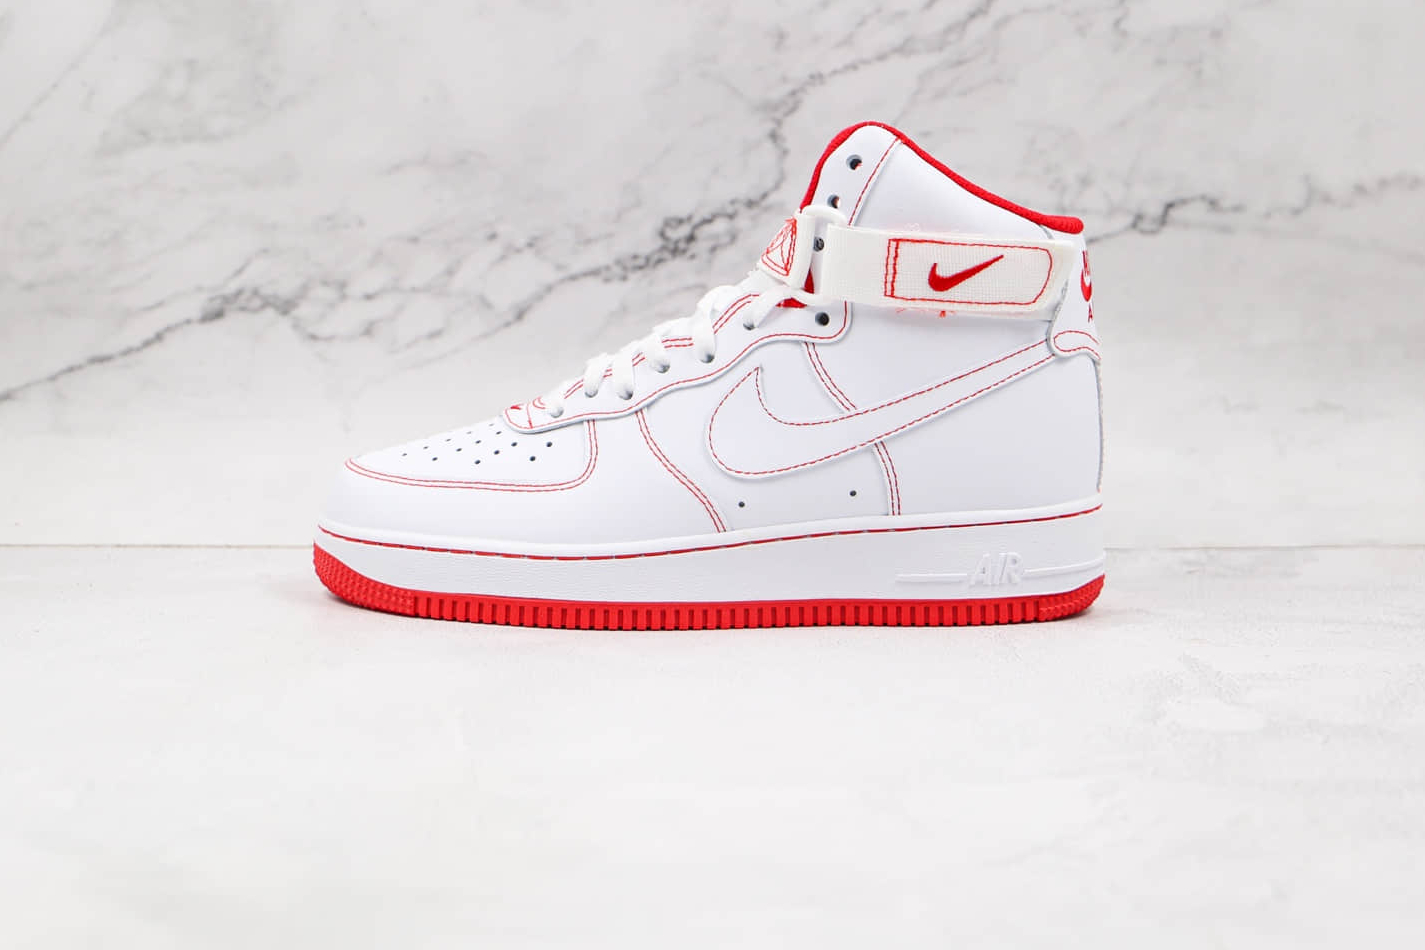 Nike Air Force 1 High '07 'University Red' CV1753-100 - Shop Now!